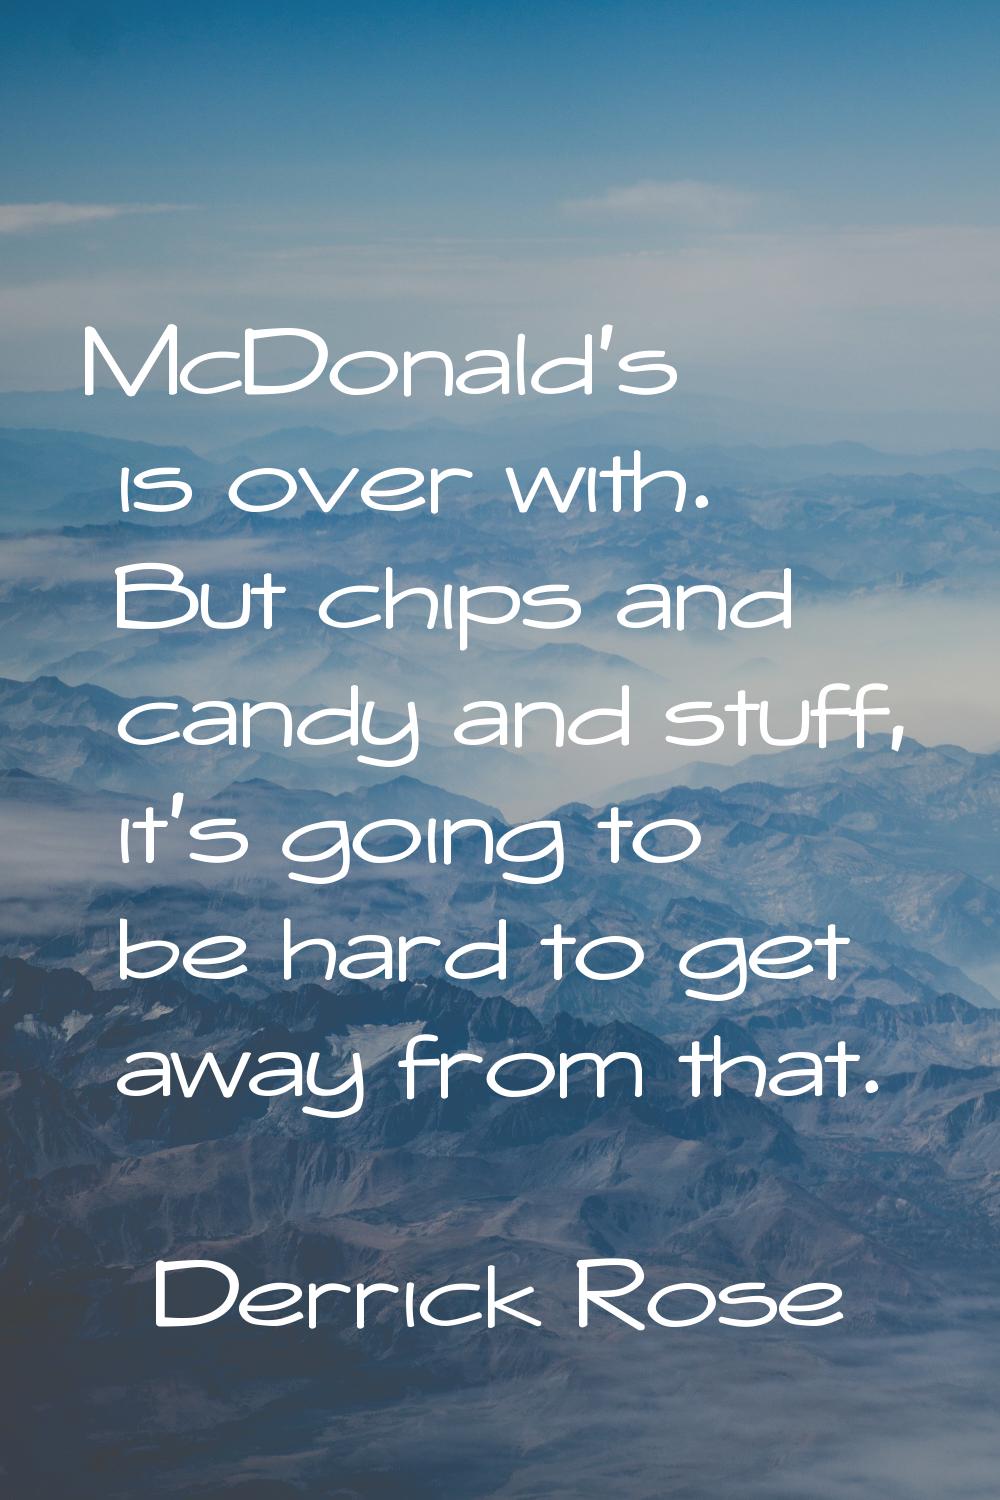 McDonald's is over with. But chips and candy and stuff, it's going to be hard to get away from that